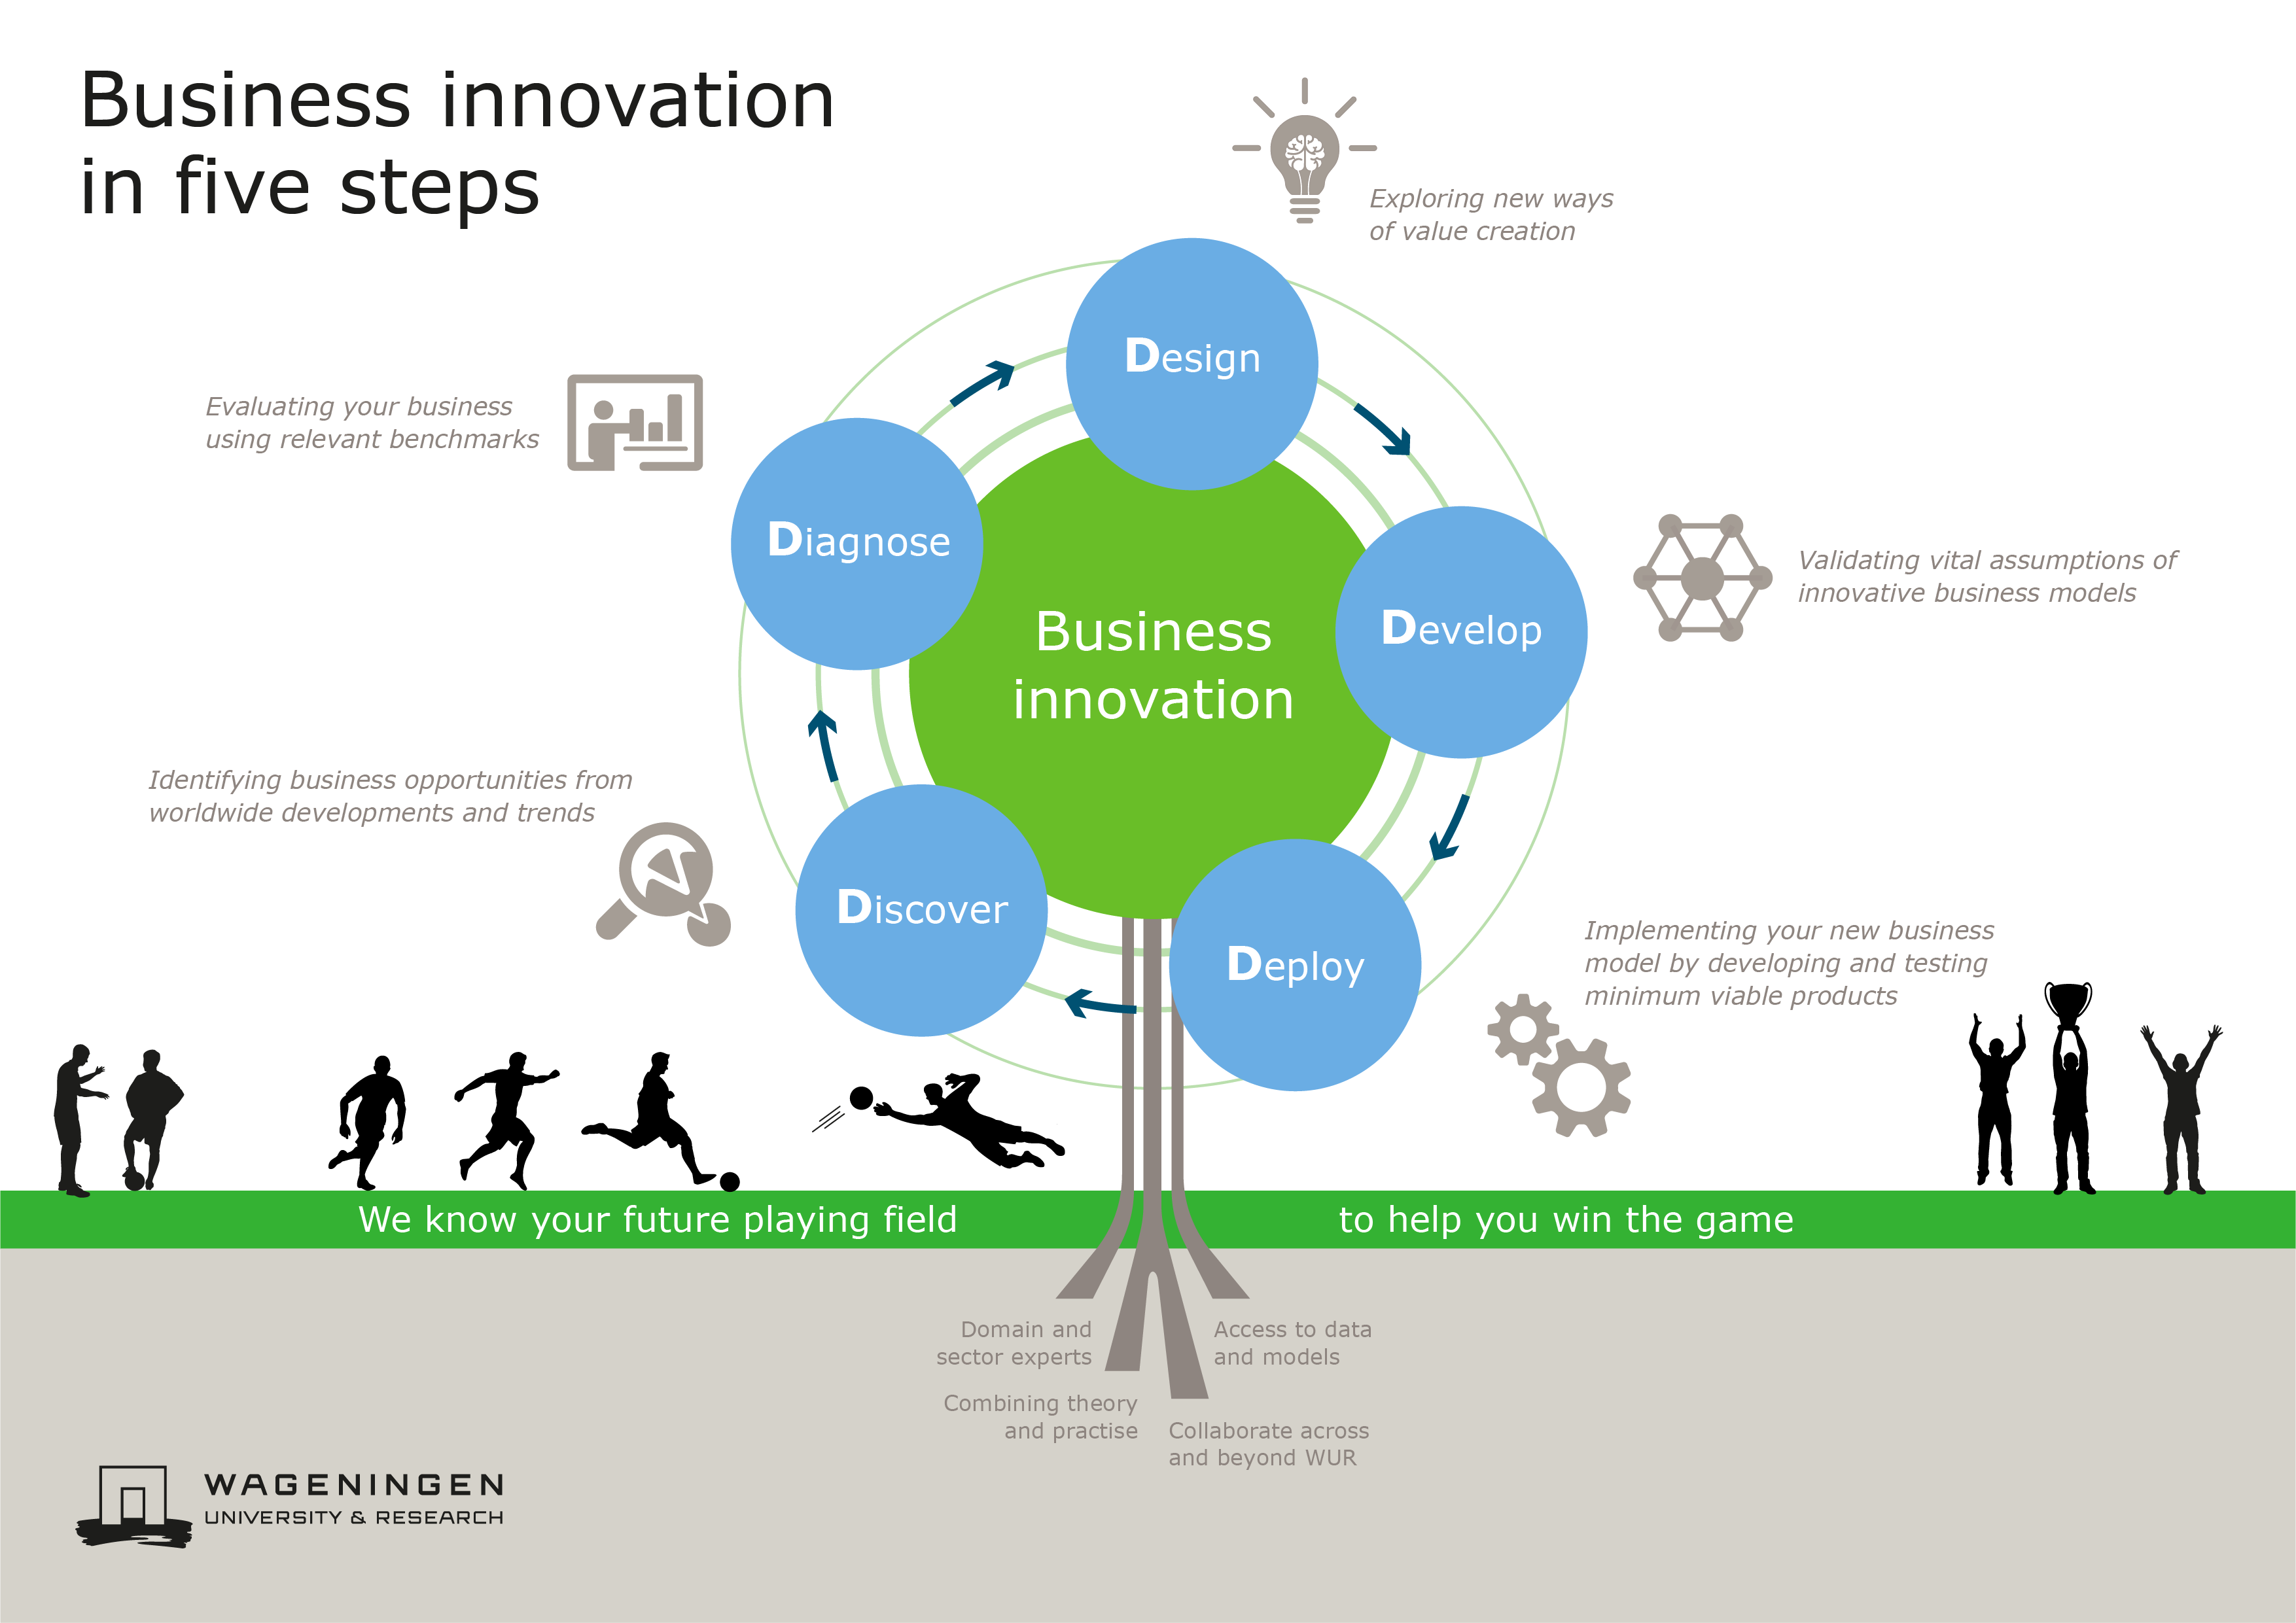 Figure 1: Innovate your business in five steps